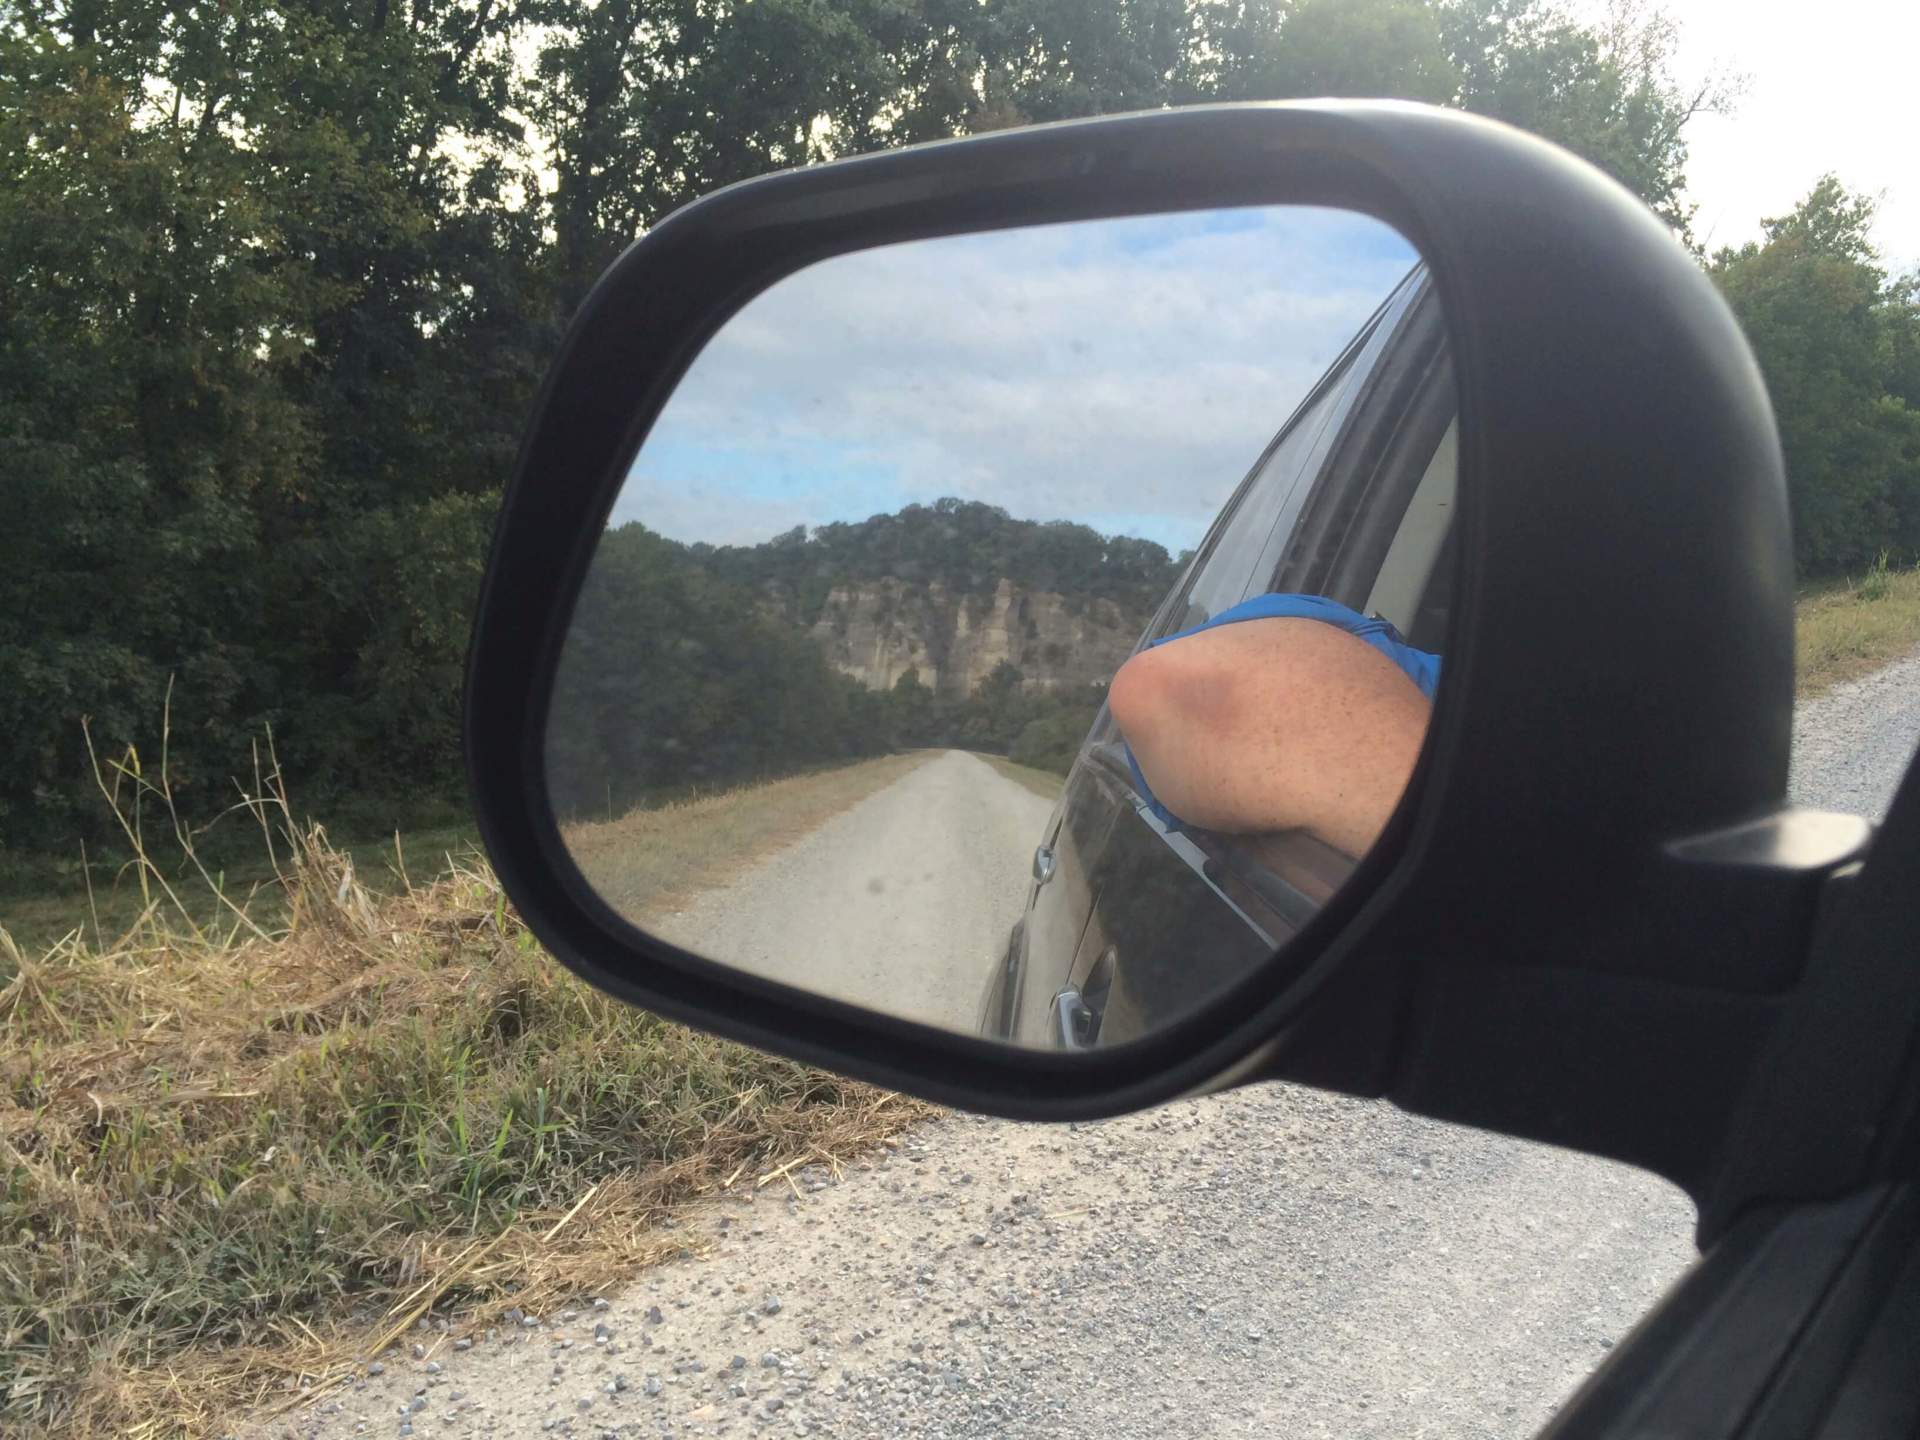 Car leaving with shawnee national forest showing in the rear mirror